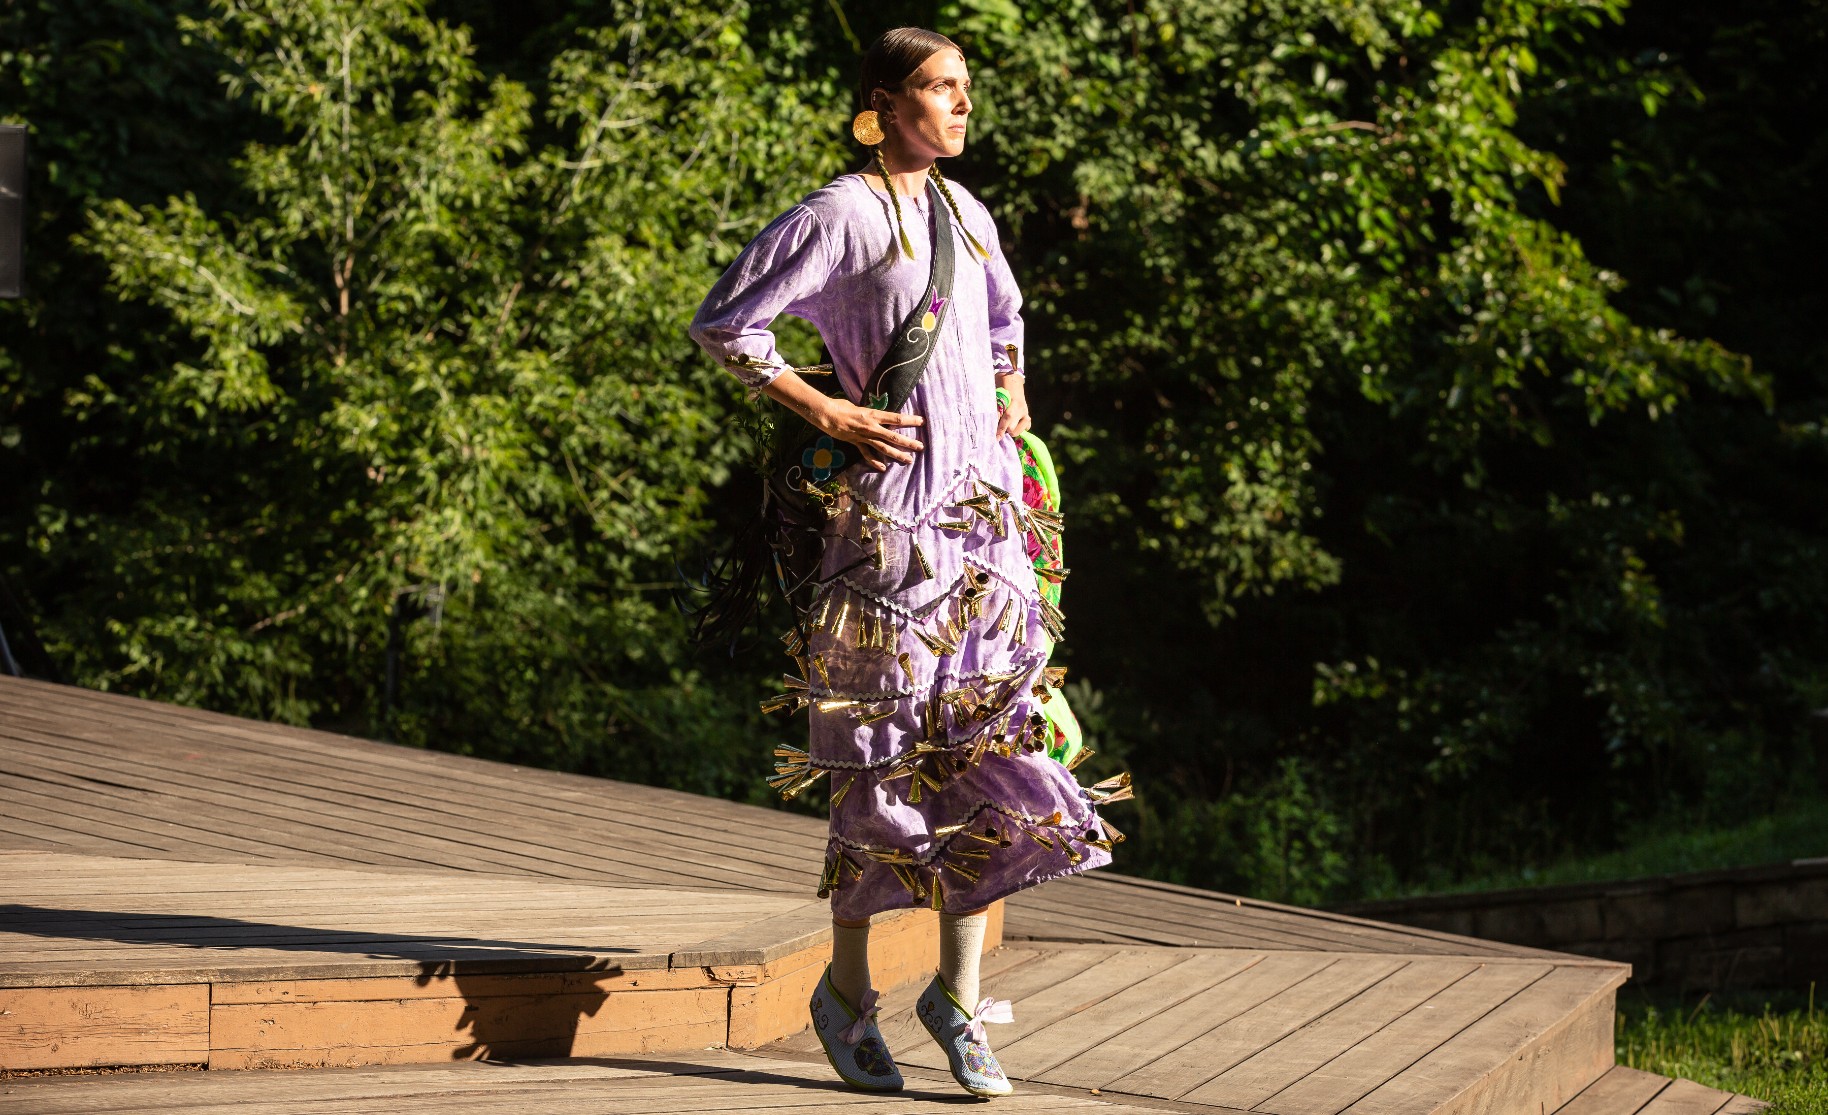 A performer stands on their toes at the edge of a wooden stage surrounded by trees. They are wearing a light purple dress with many small bells sewn onto the lower half, their long brown hair is in braids.